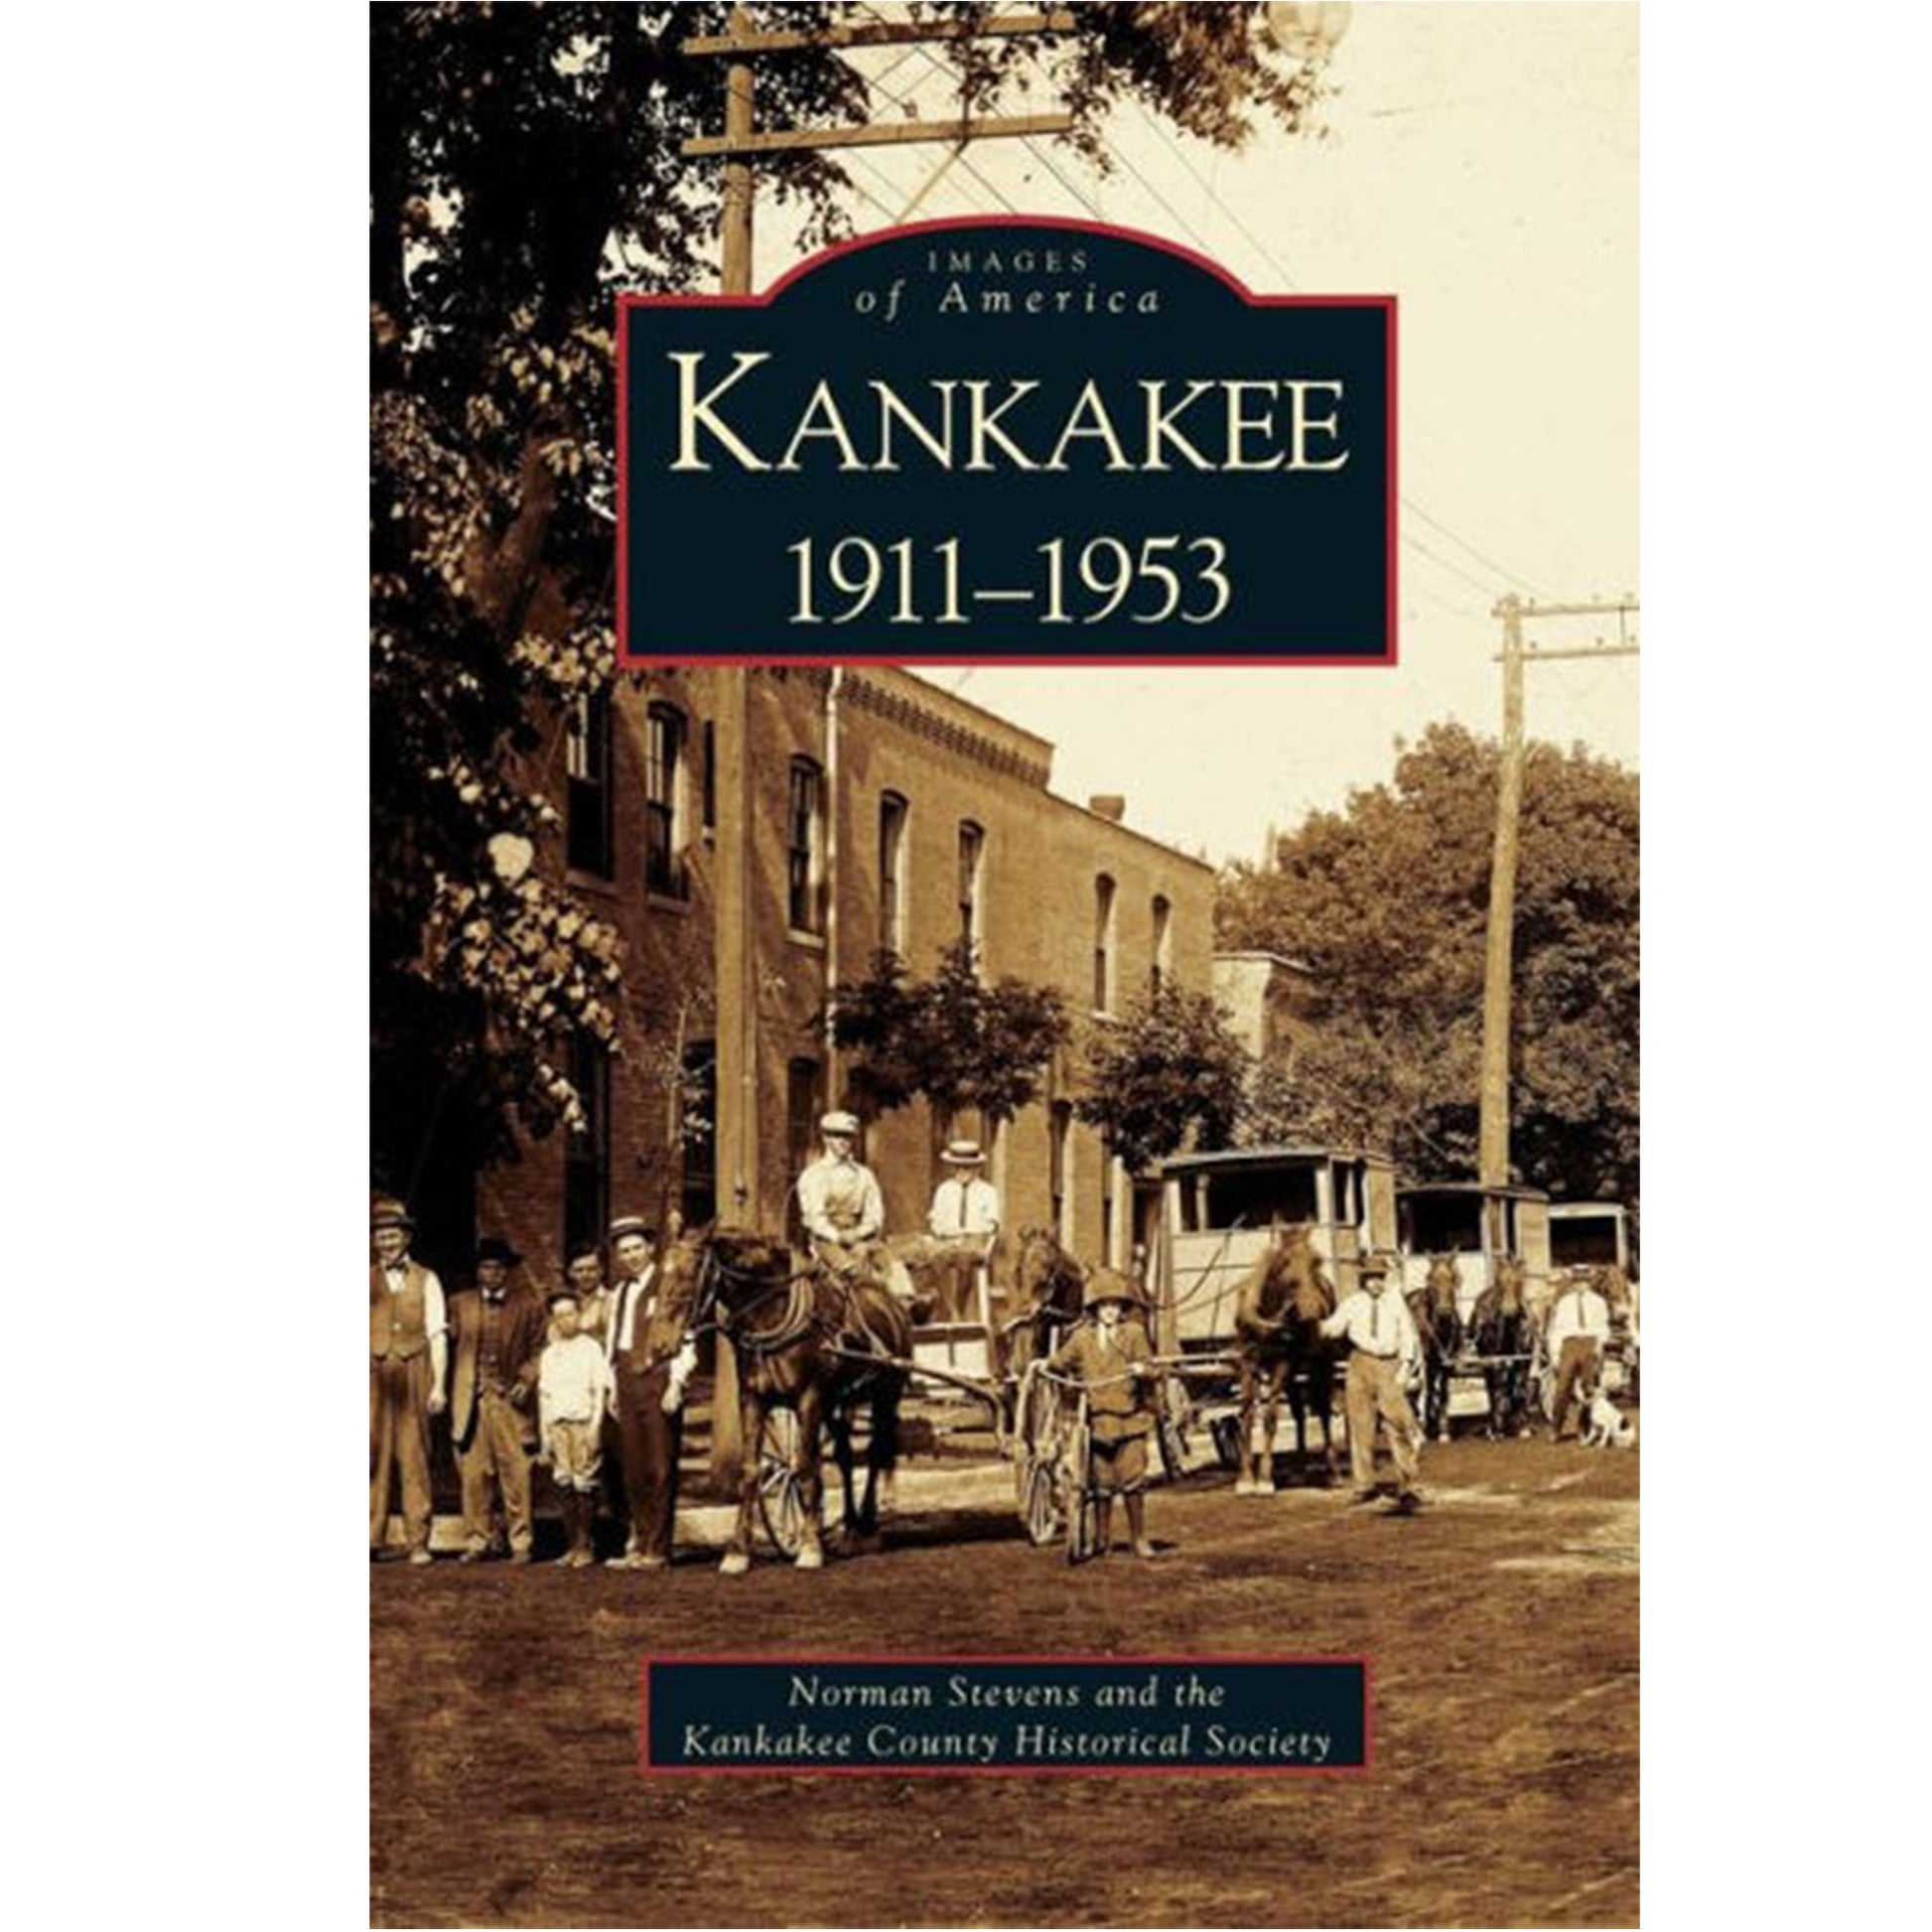 Arcadia Images of America: KANKAKEE 1853-1910 & 1911-1953 Two-Book Set by Norman Stevens